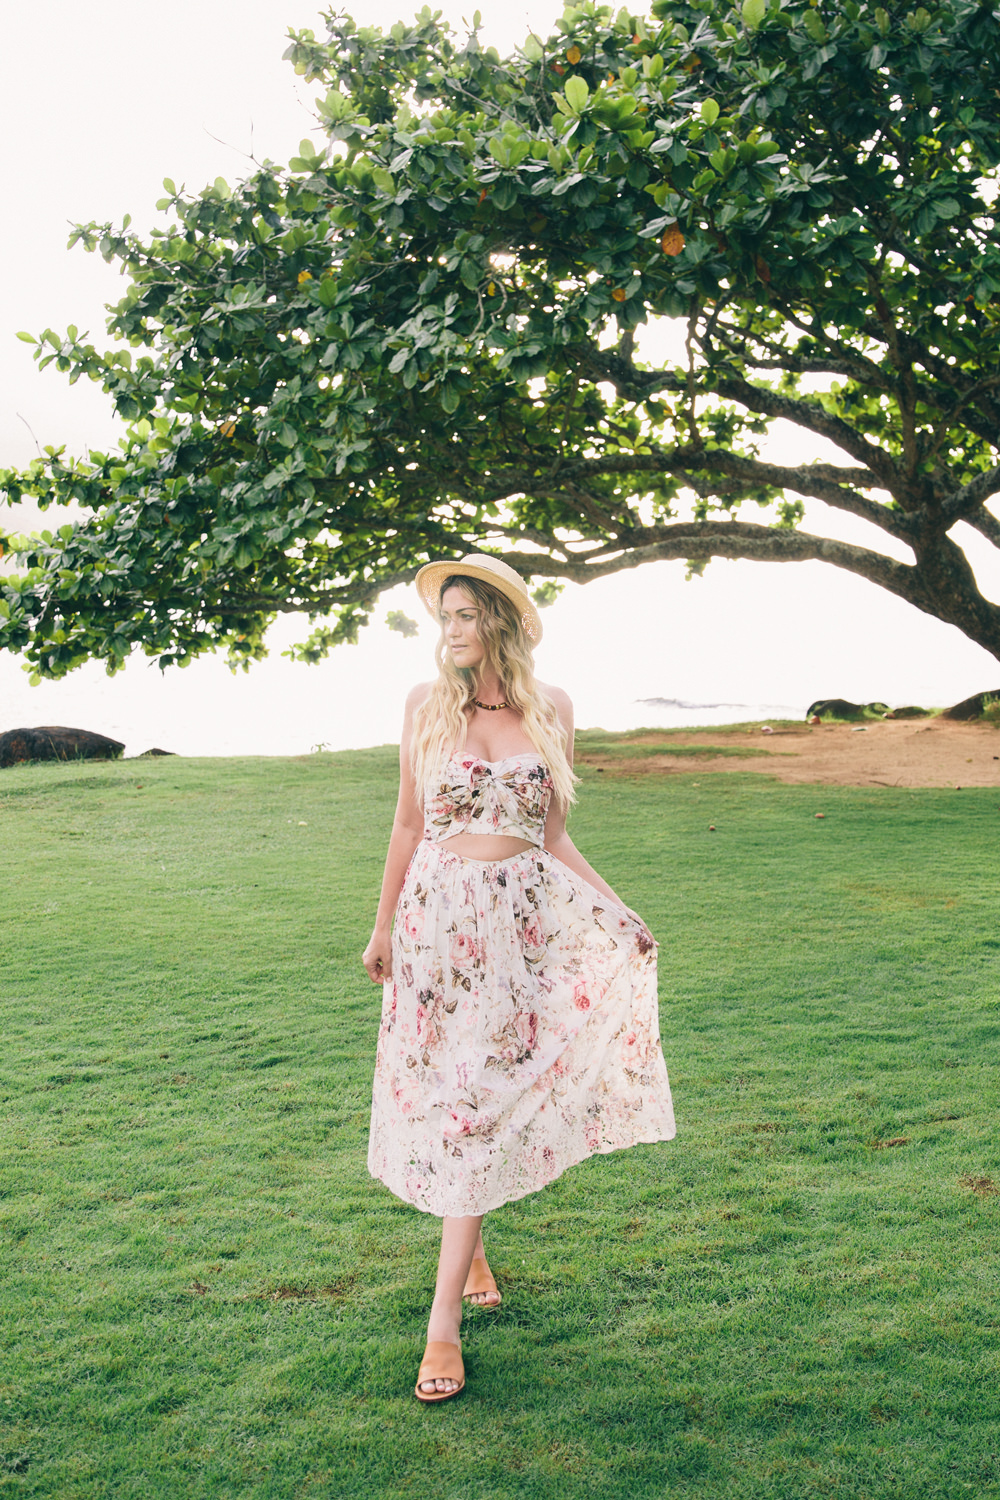 Dash of Darling shares her anniversary celebration at the beautiful St. Regis Princeville in Kauai Hawaii with her husband while wearing Zimmermann.